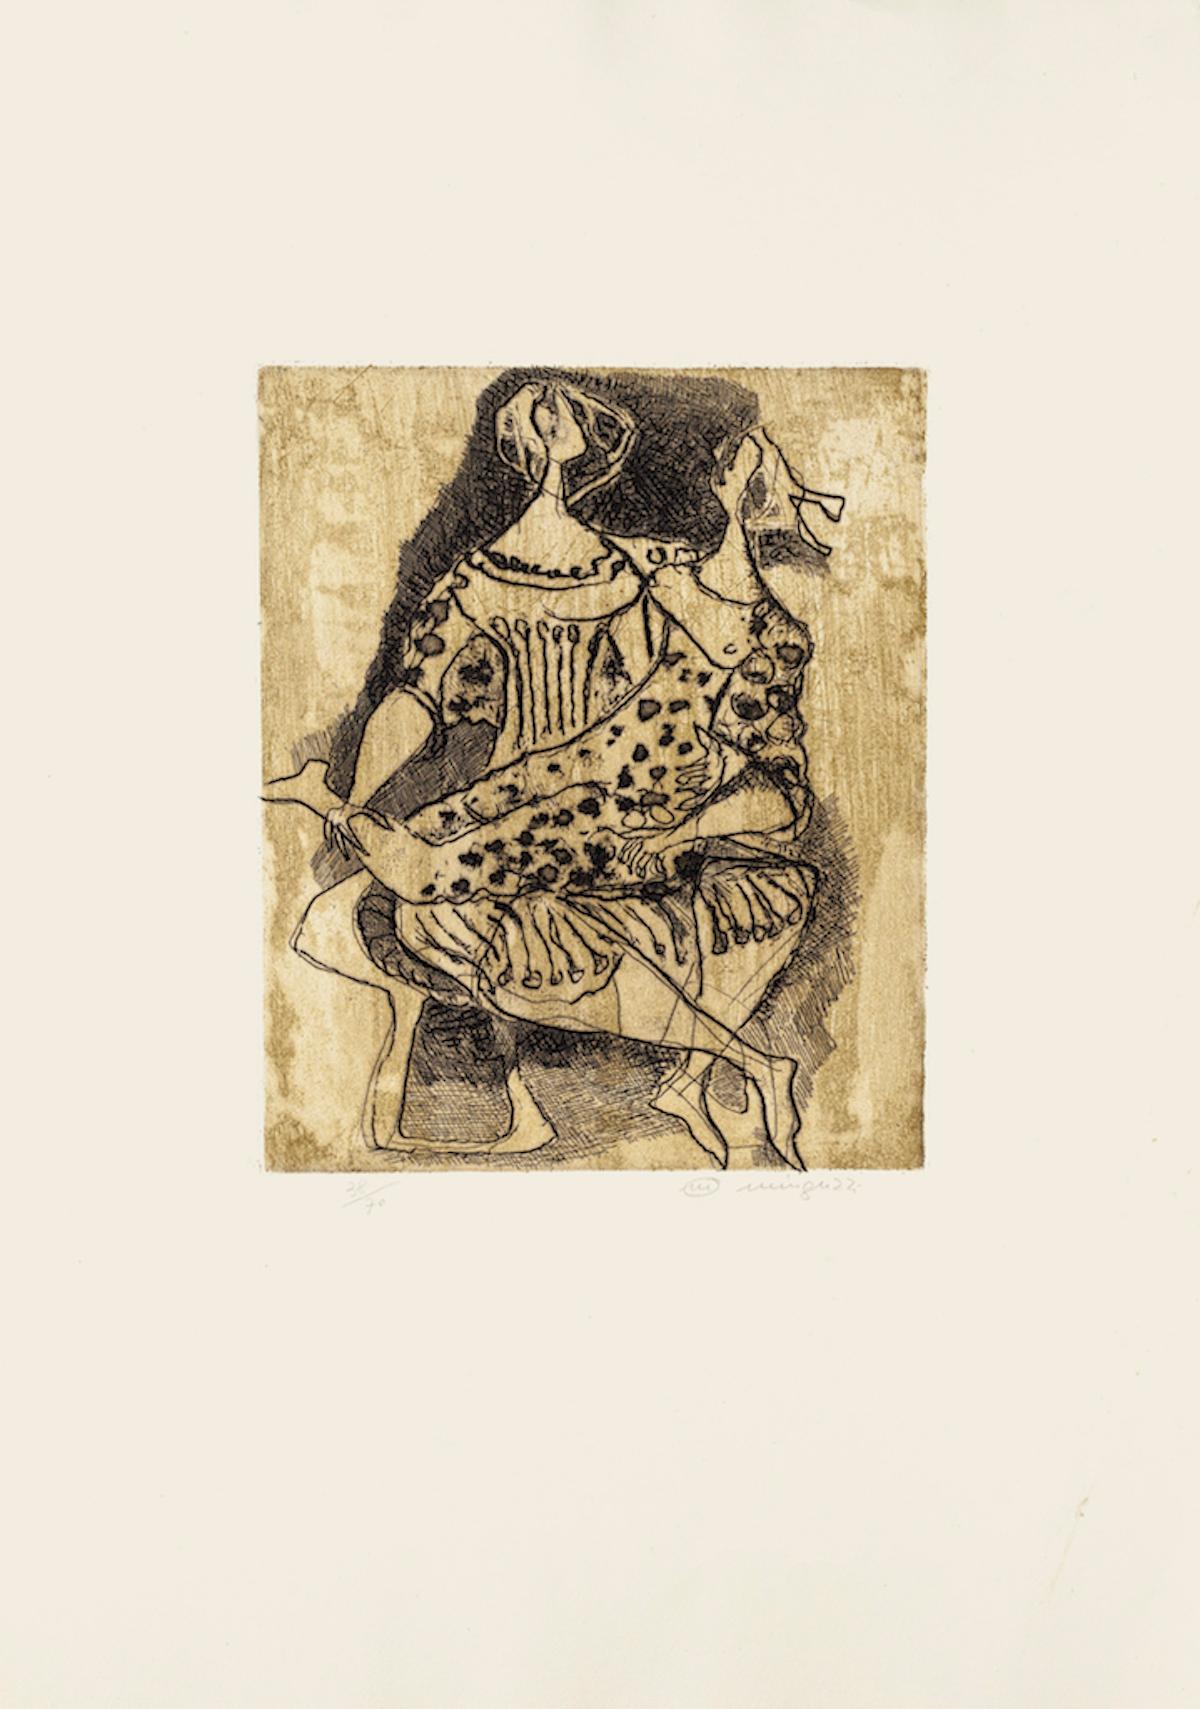 Image 29.5 x 24 cm.

Two Figures is an original etching on paper, realized by the Italian artist Luciano Minguzzi, the artwork is hand-signed, numbered by the artist in pencil on the lower, edition of 38/70.

Sheet dimension: 61.5 x 45 cm.

Image